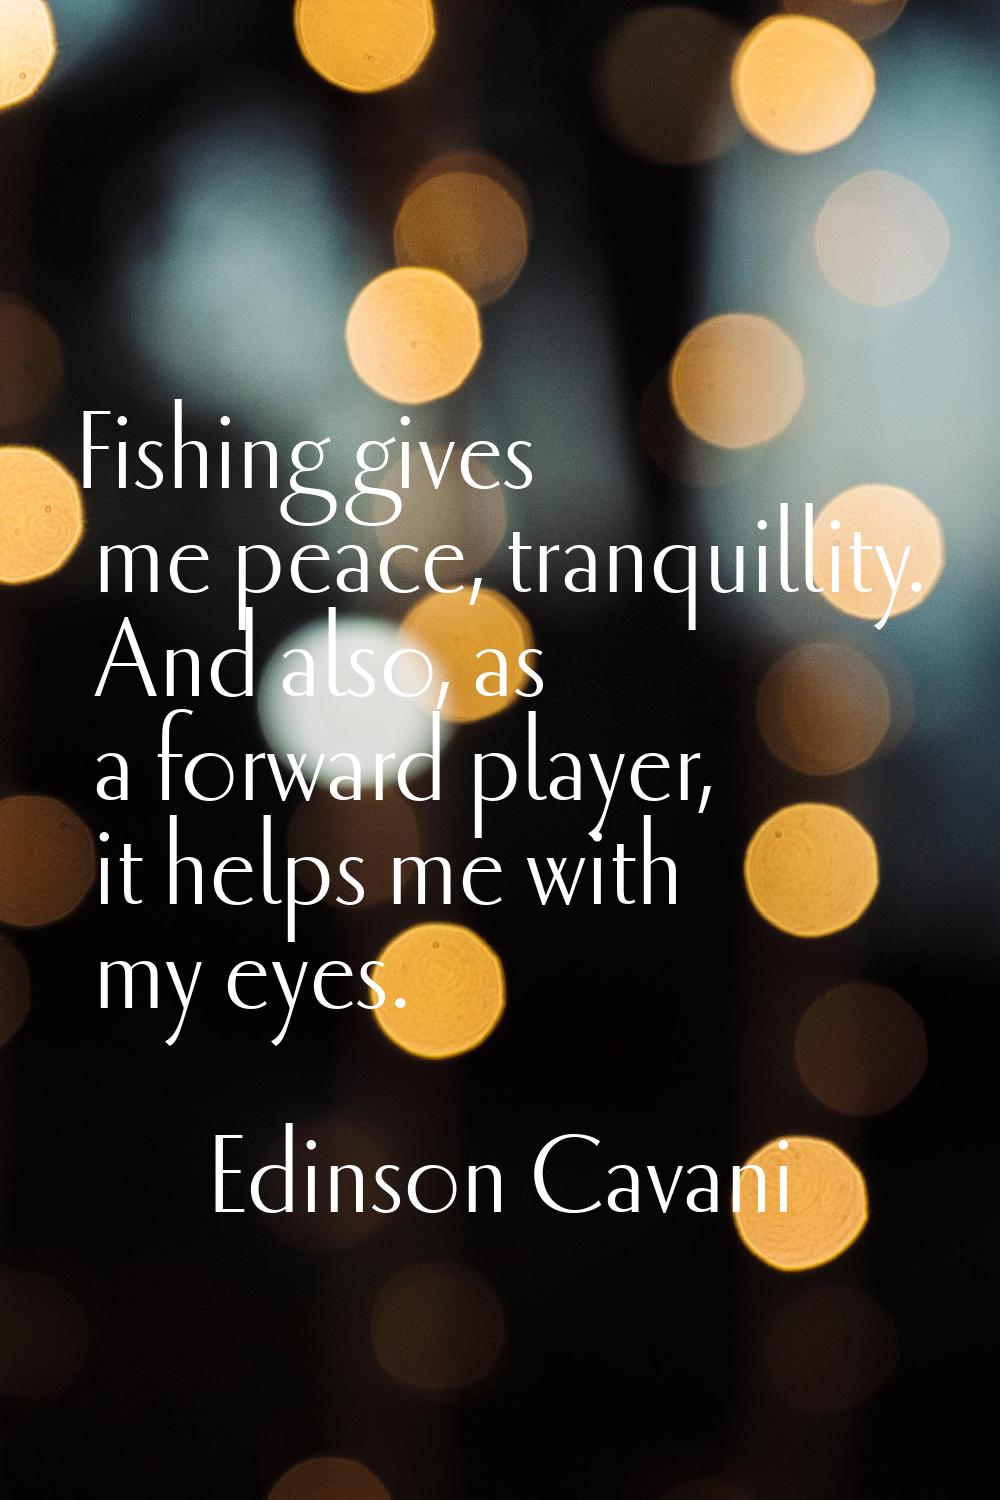 Fishing gives me peace, tranquillity. And also, as a forward player, it helps me with my eyes.